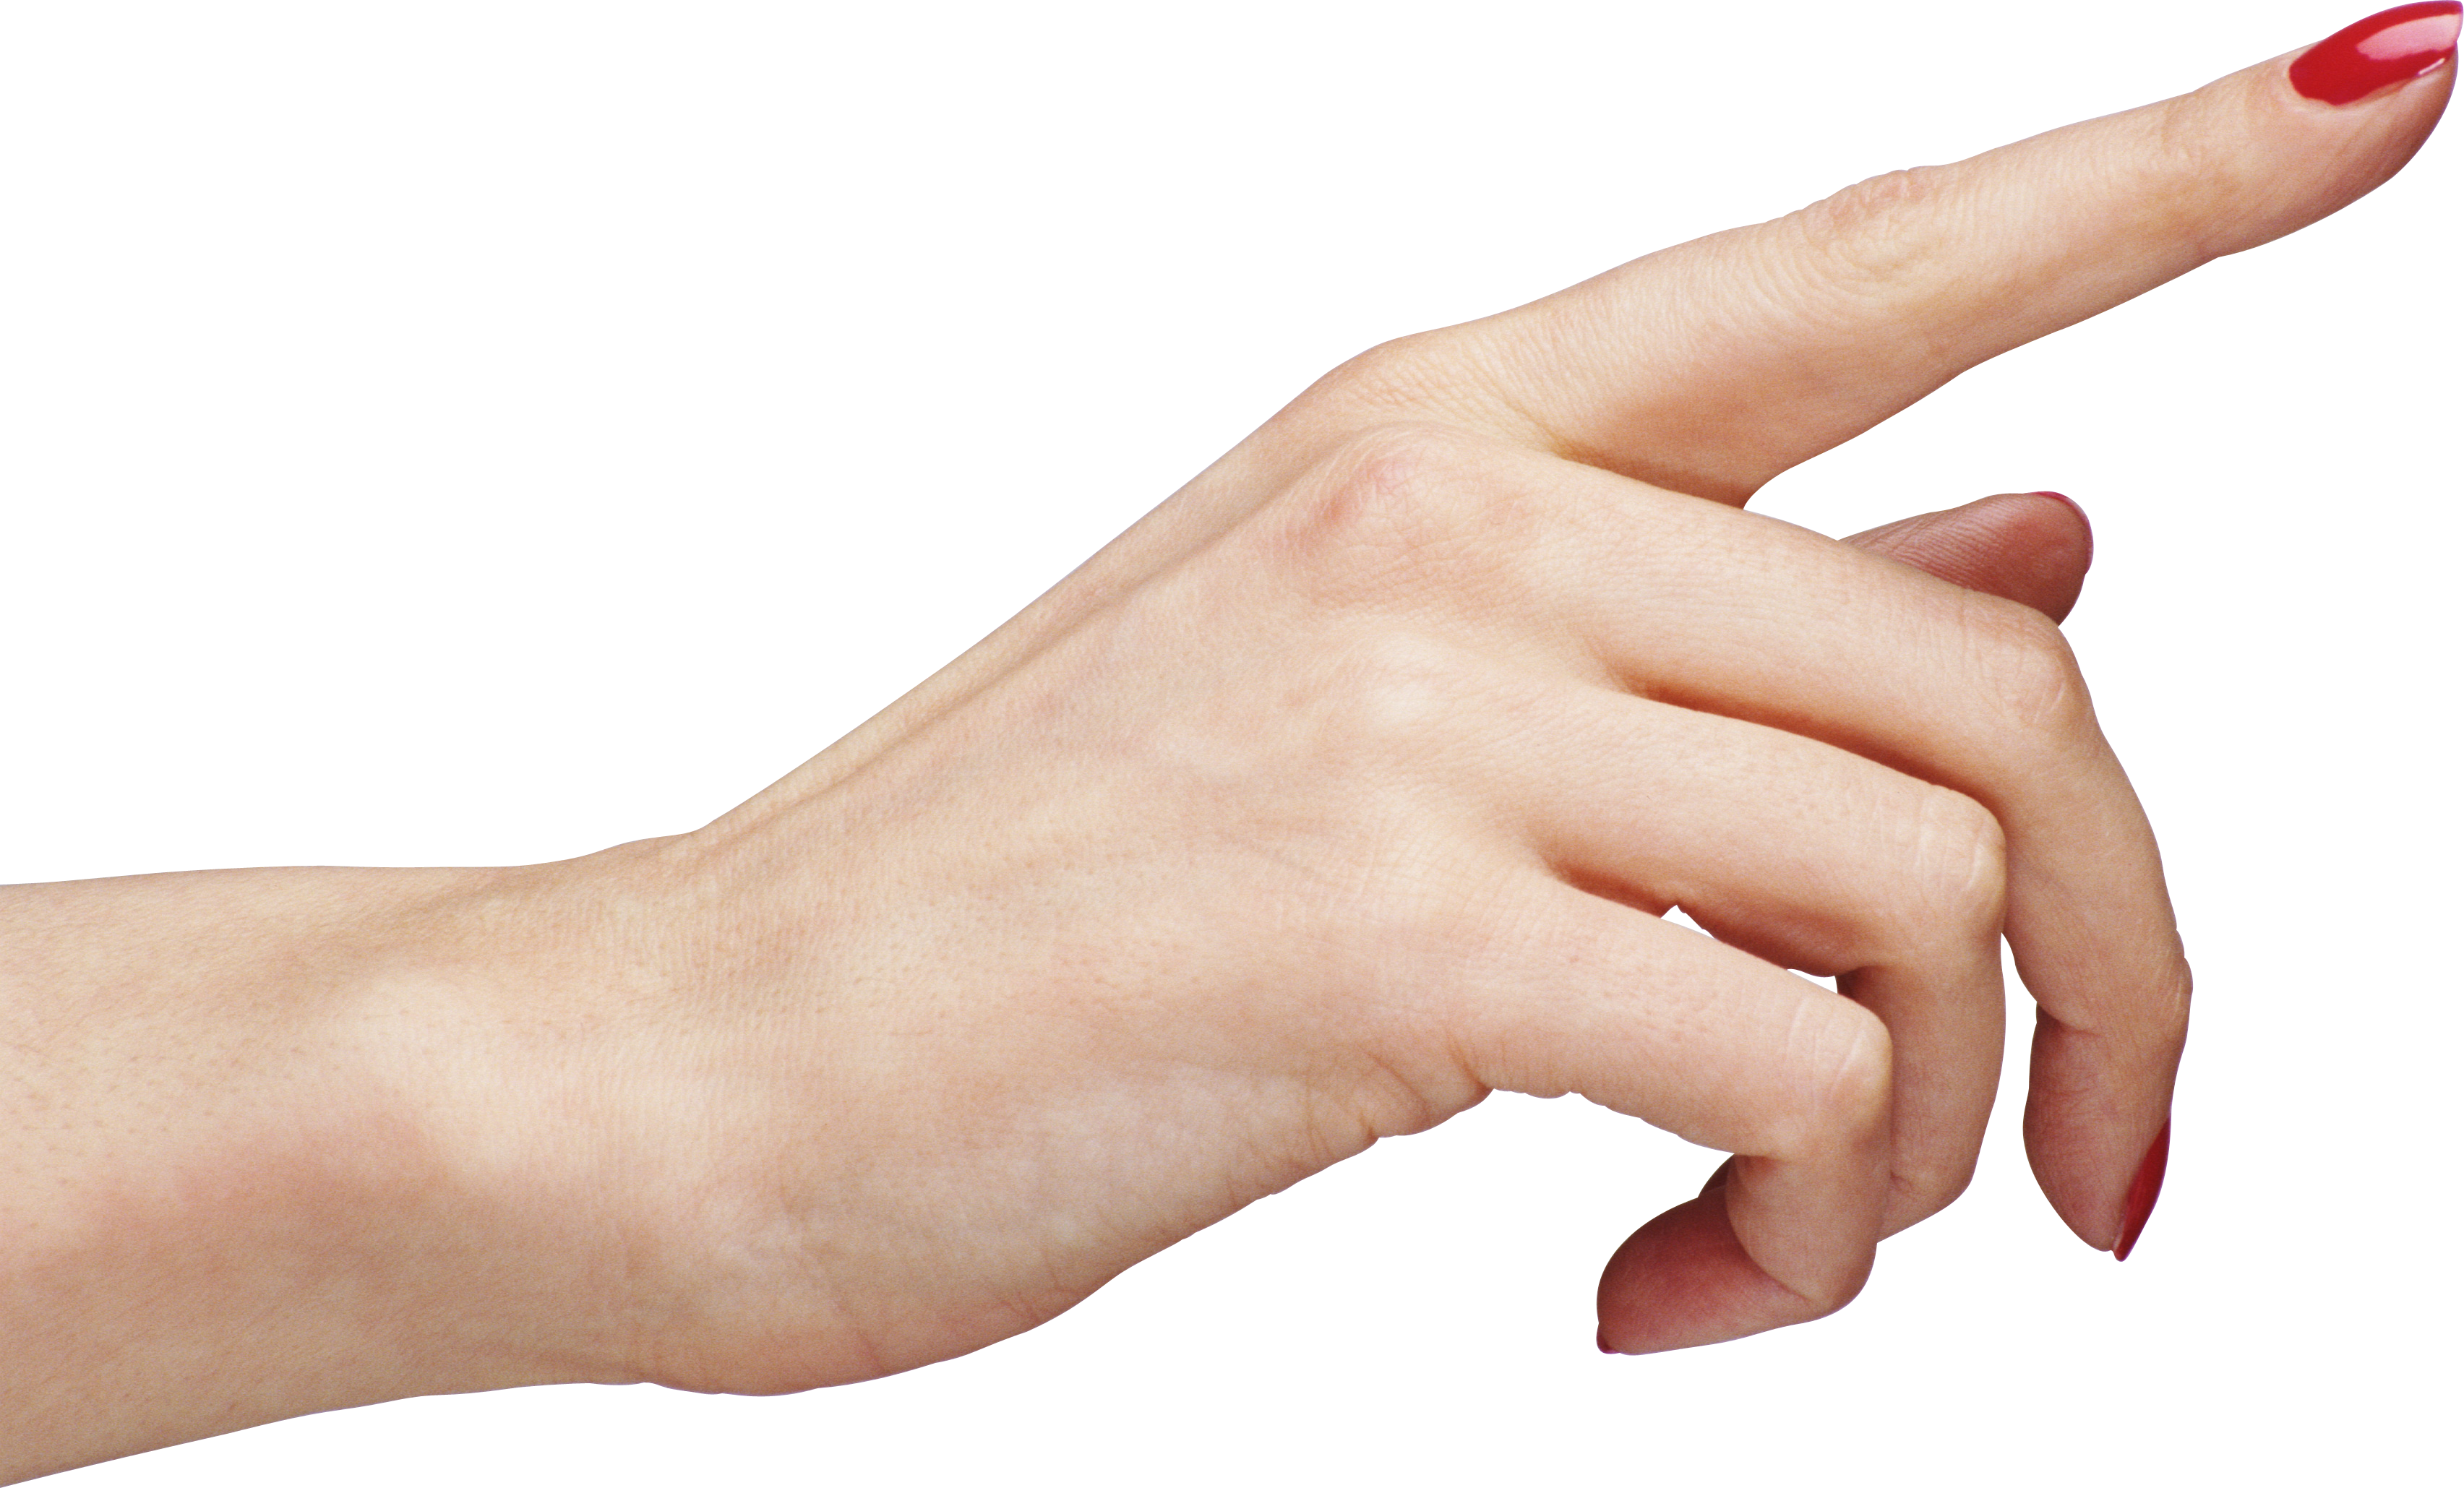 hand PNG, Hands PNG images, PNG image: hand PNG, free PNG image, Hands.